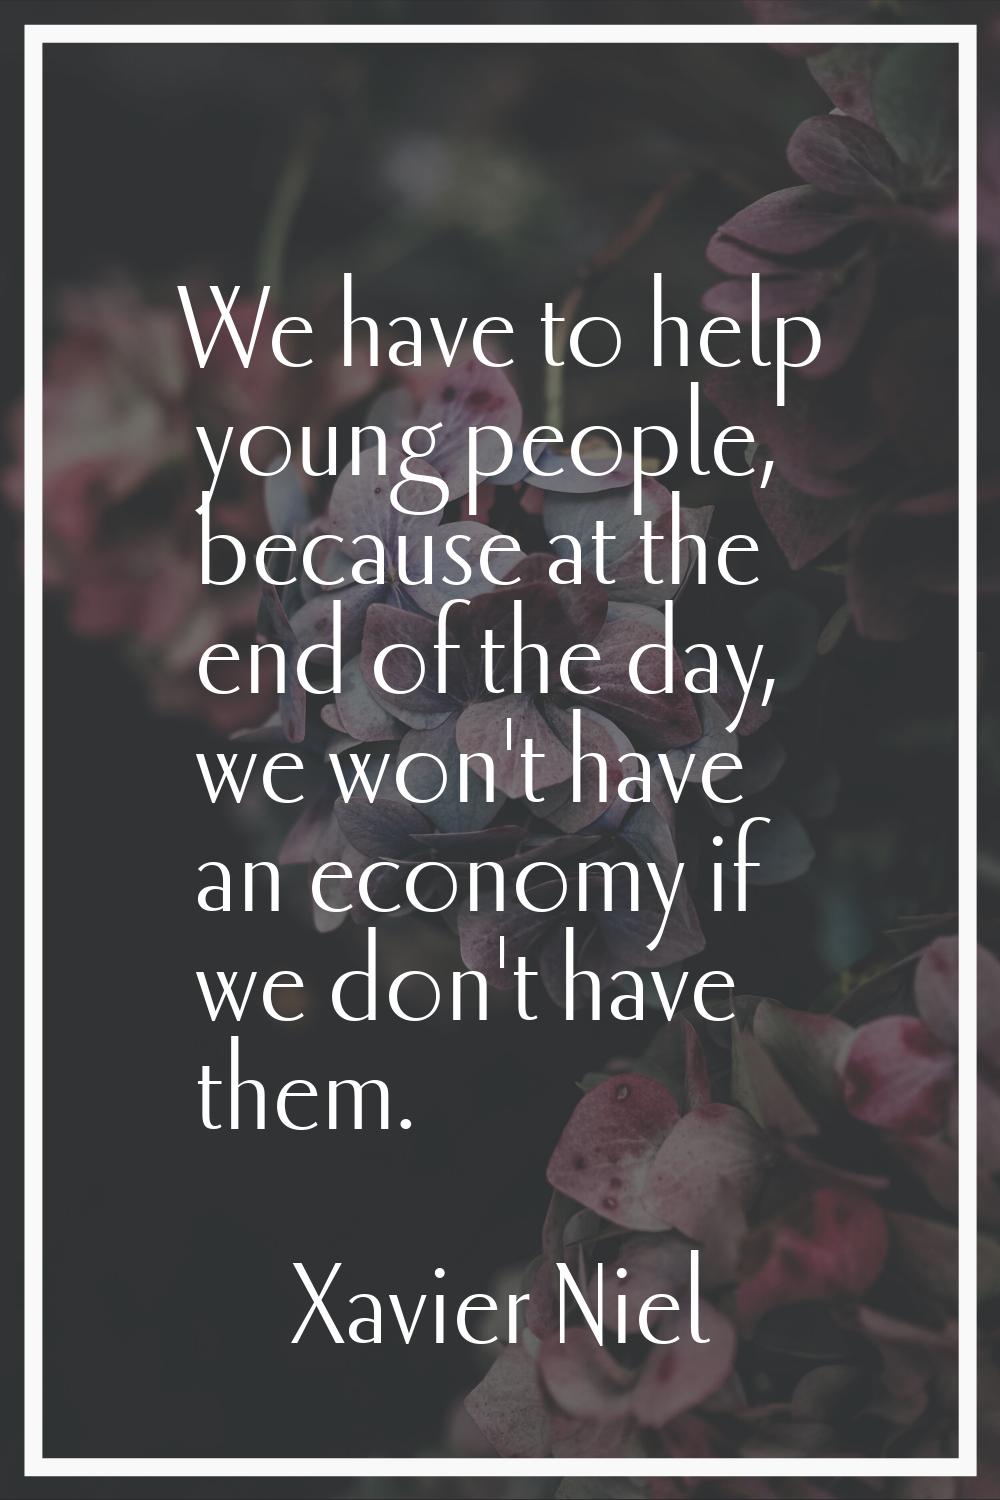 We have to help young people, because at the end of the day, we won't have an economy if we don't h